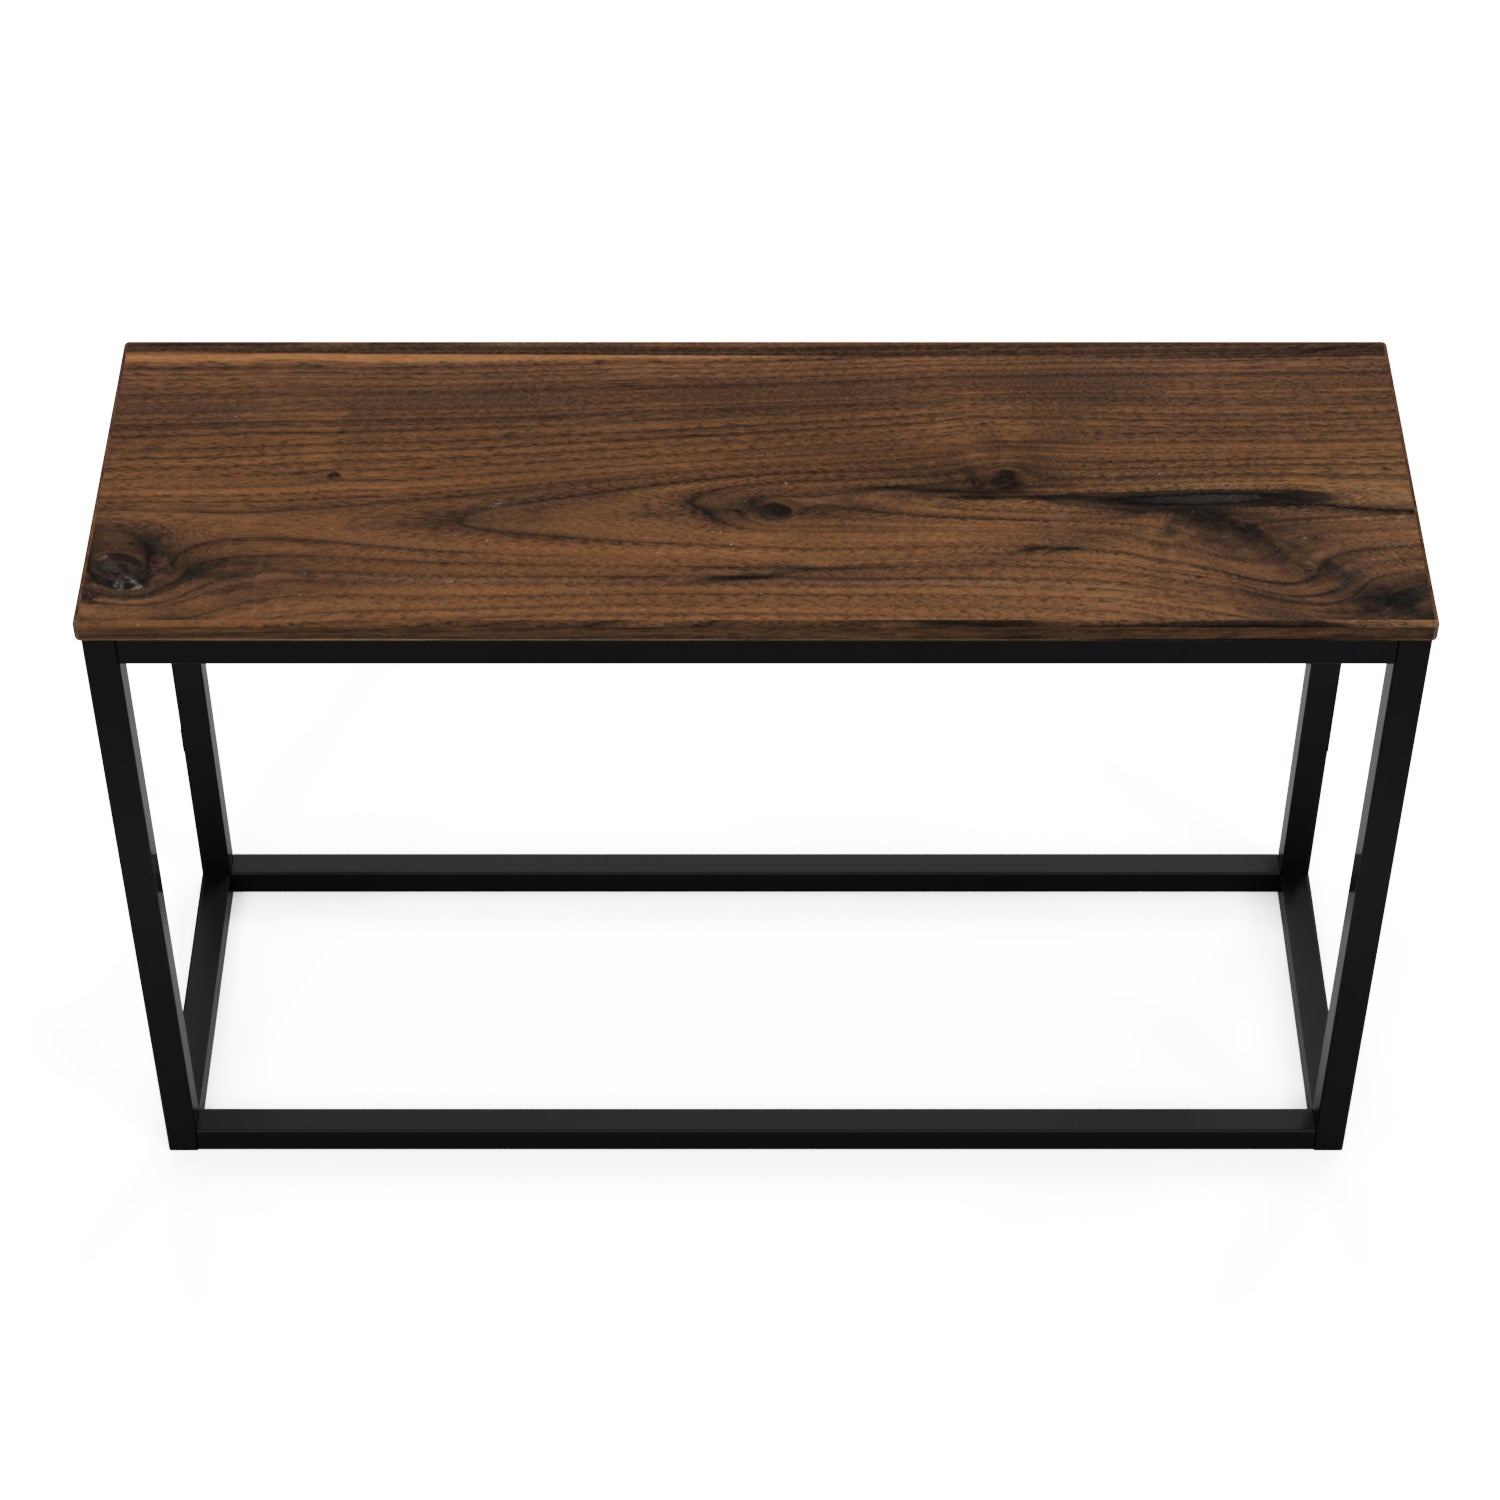 The Sedona Console Table - FargoWoodworks